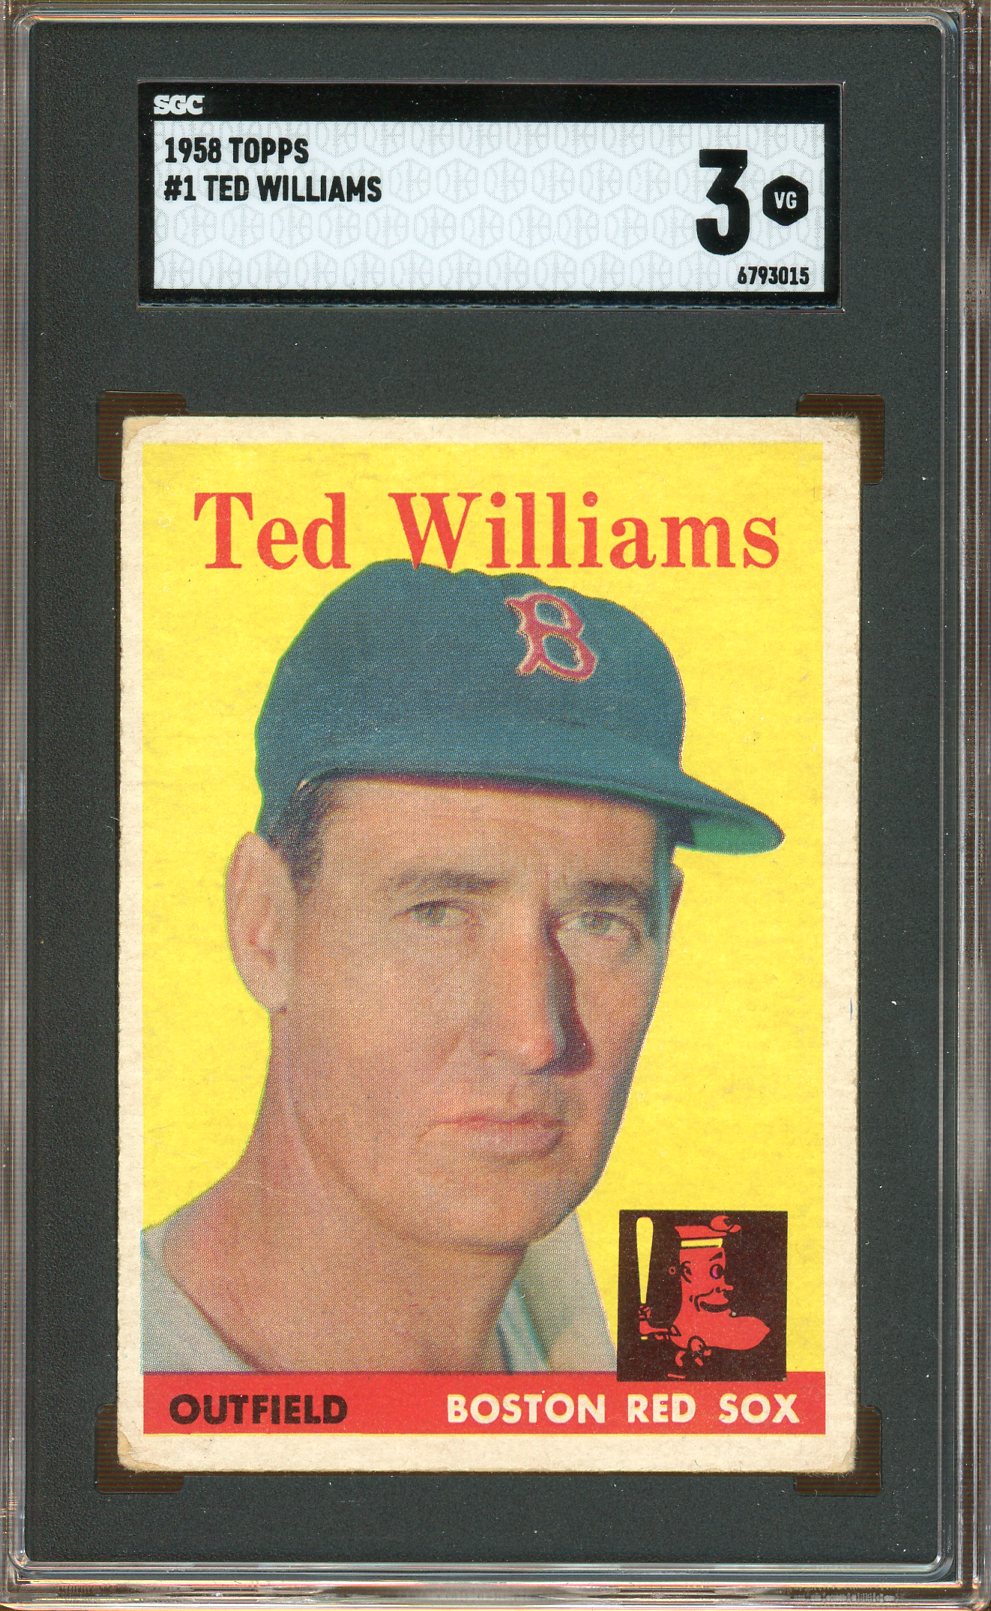 SGC 3 - 1958 Topps - #1 Ted Williams